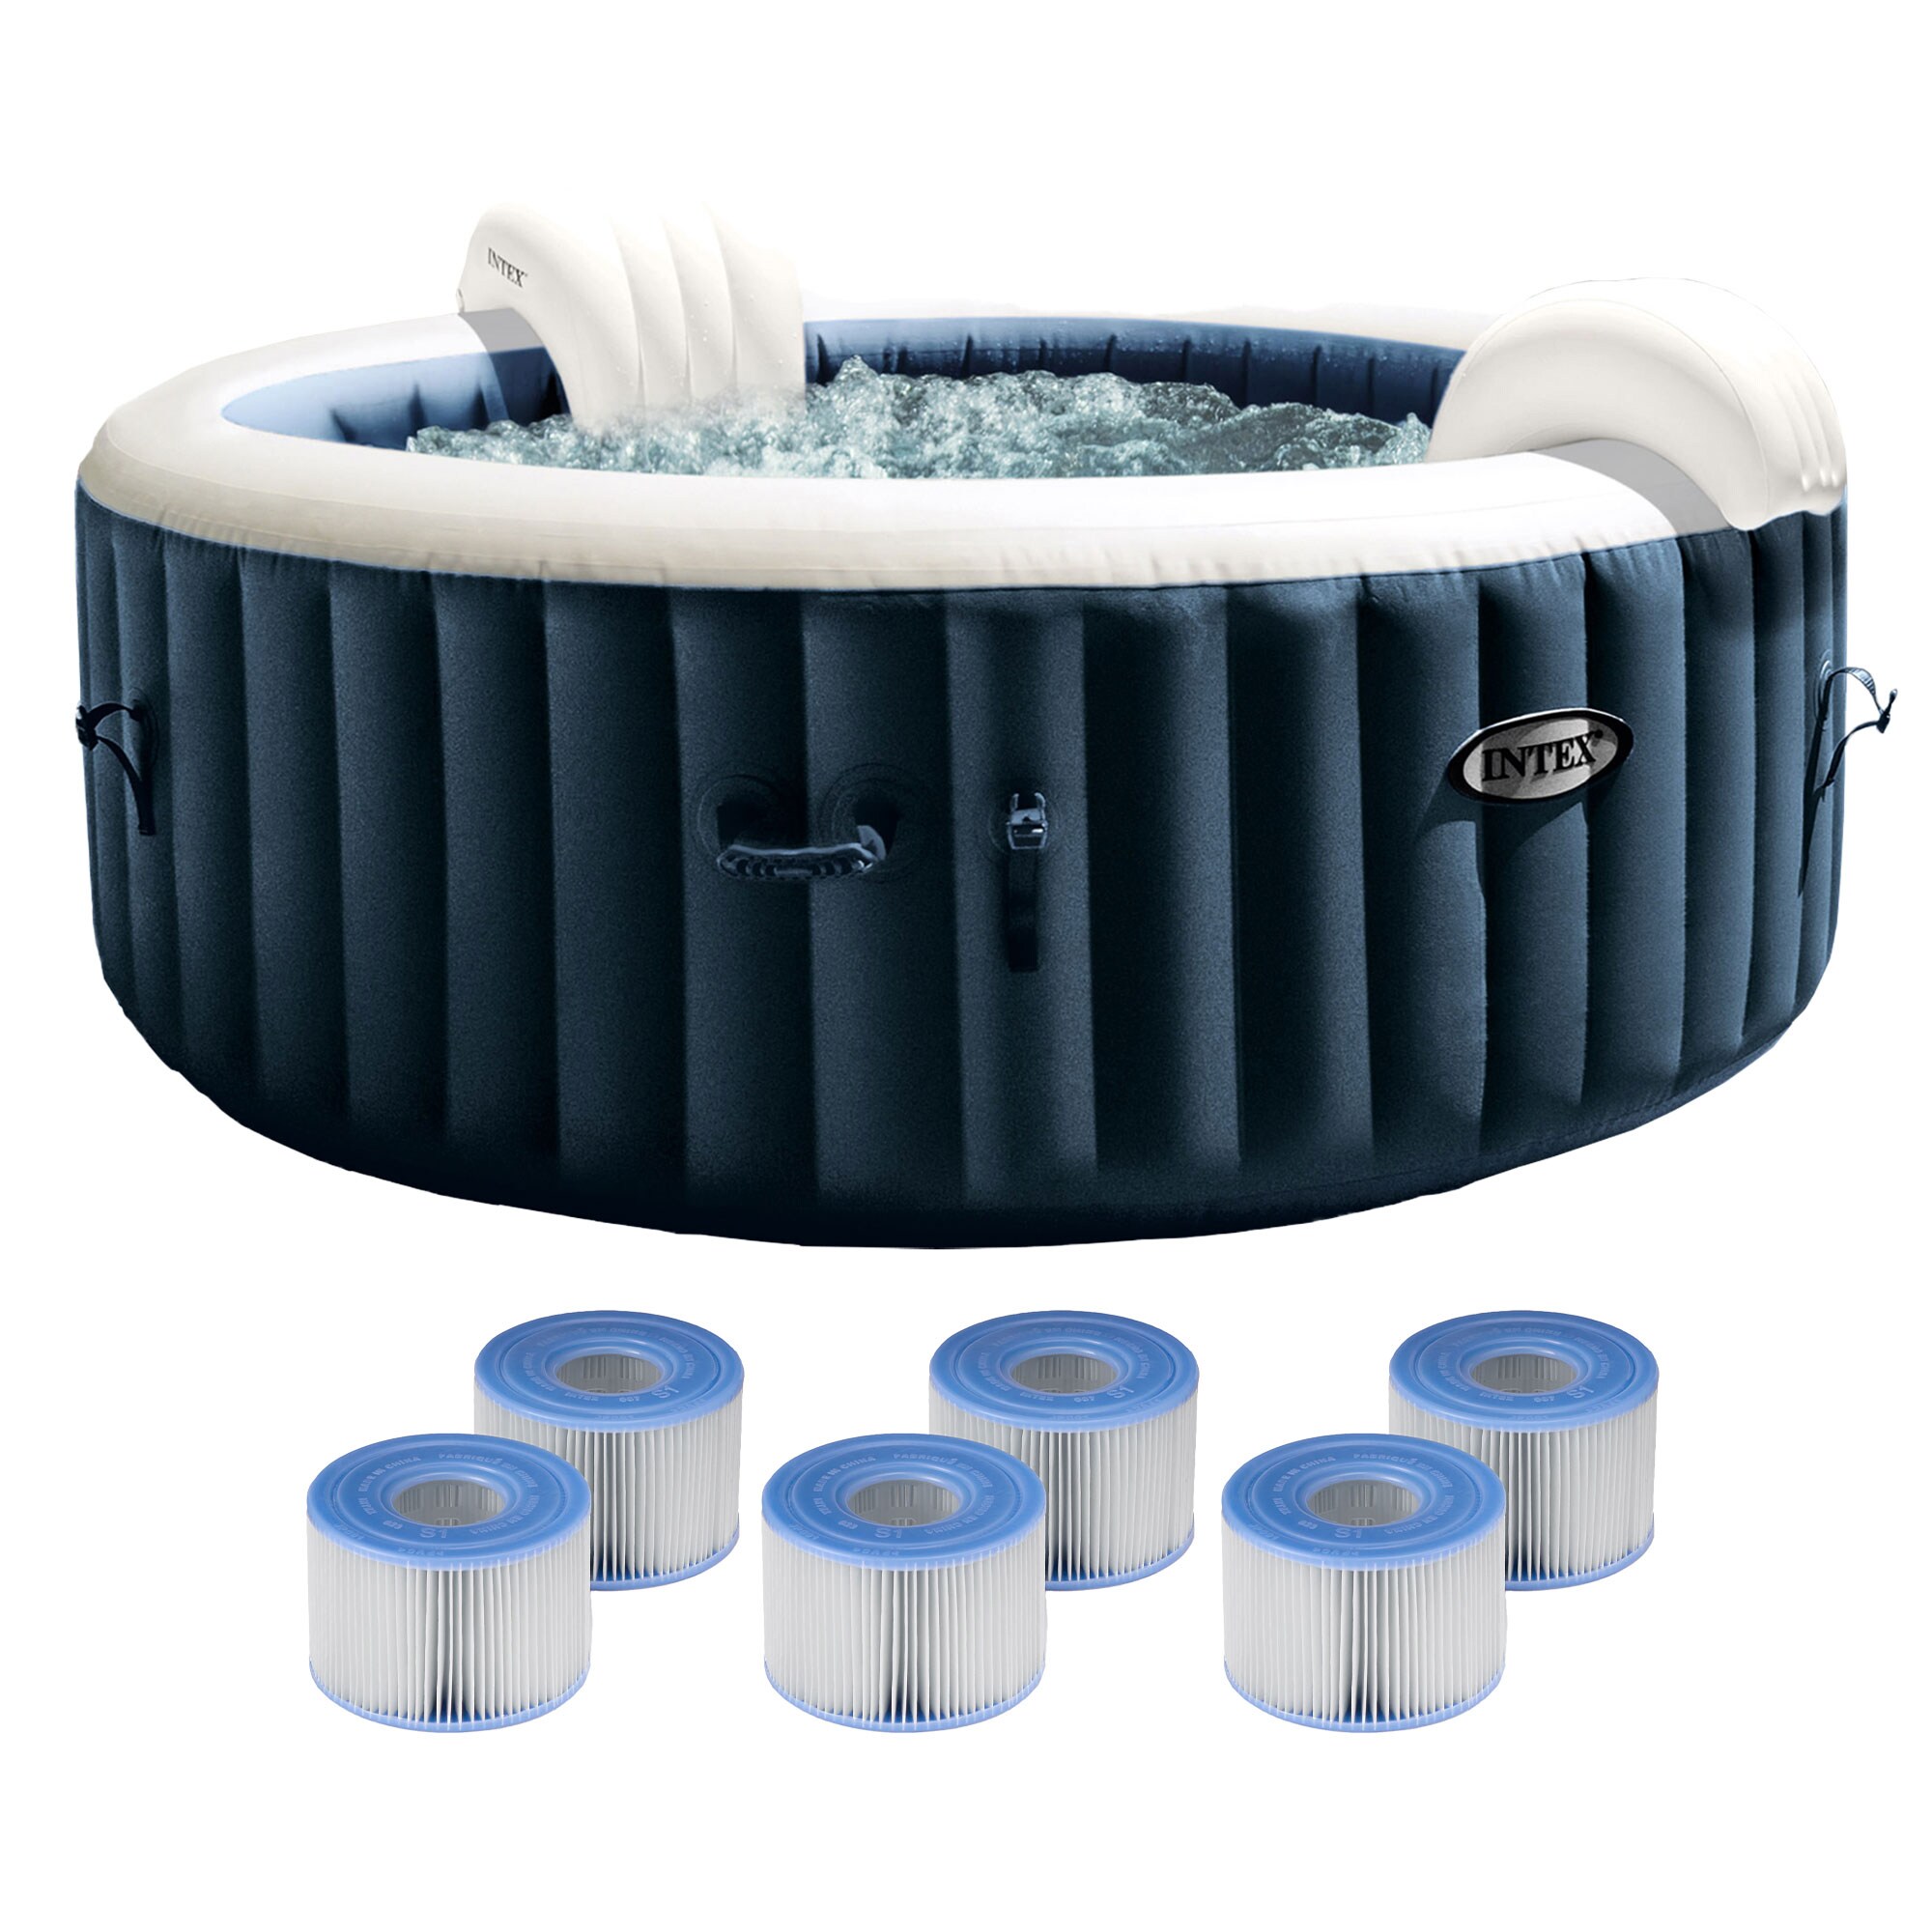 77-in x 28-in 4-Person Inflatable Round Hot Tub | - Intex 305613